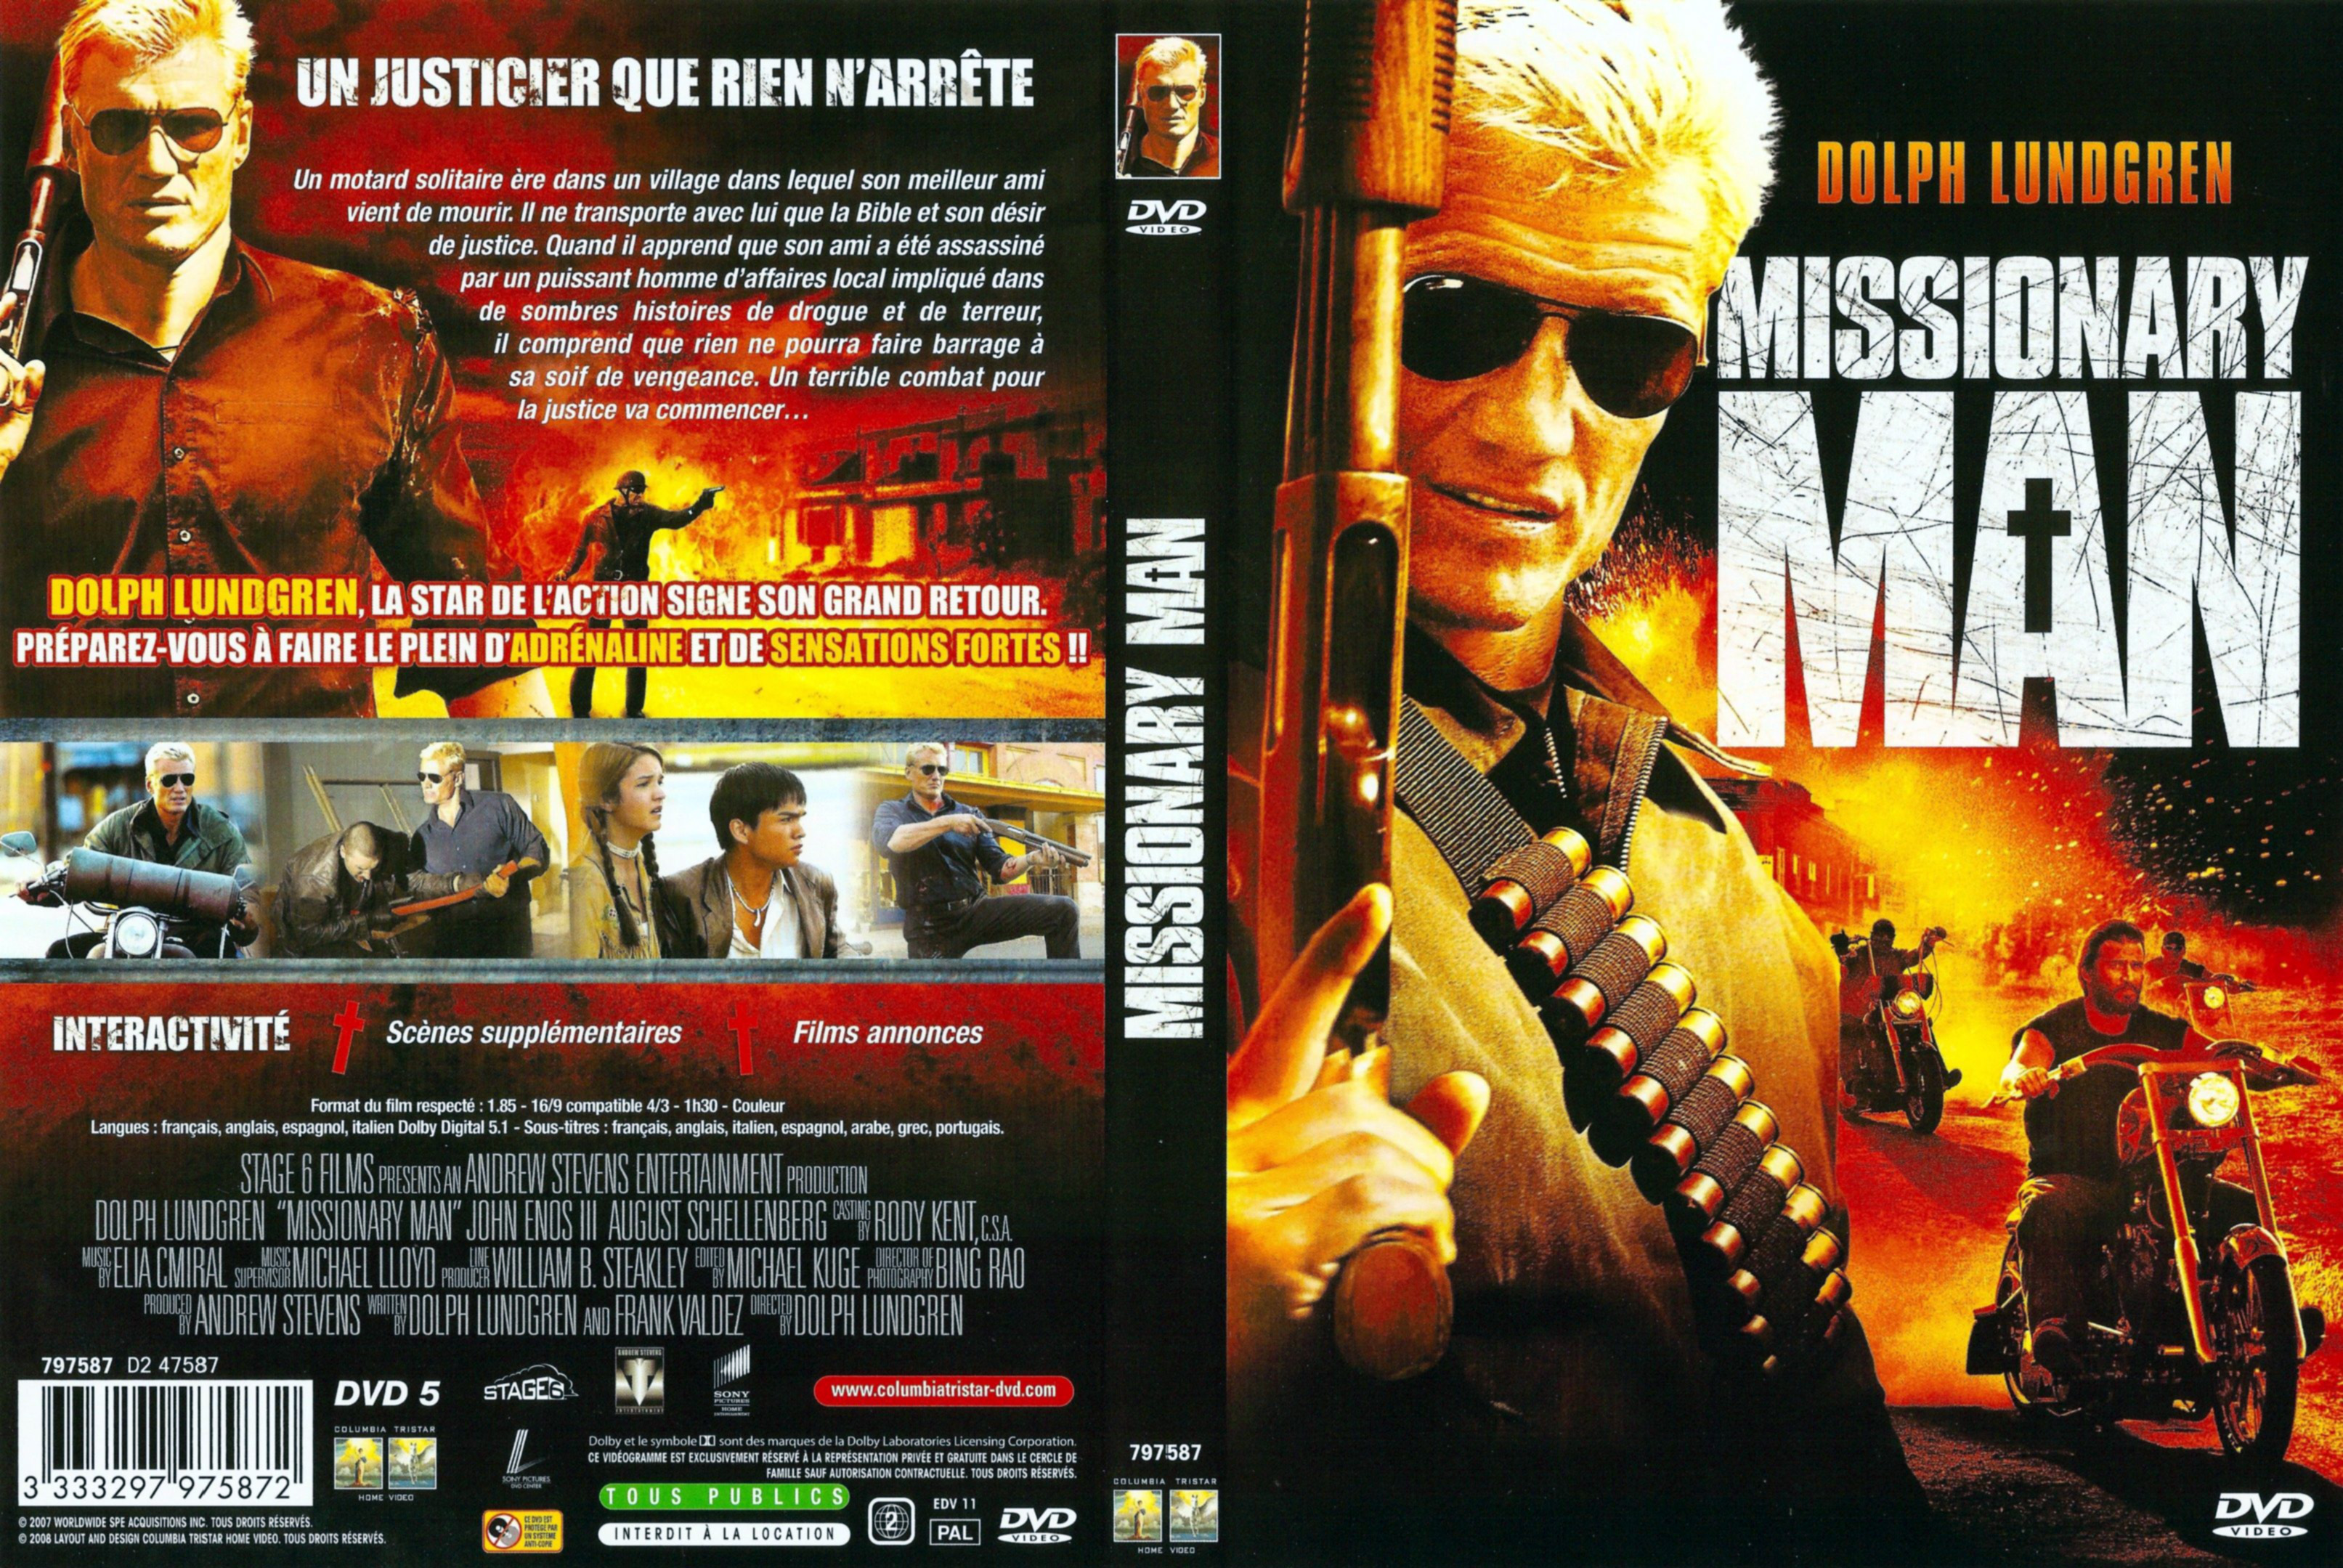 Jaquette DVD Missionary man